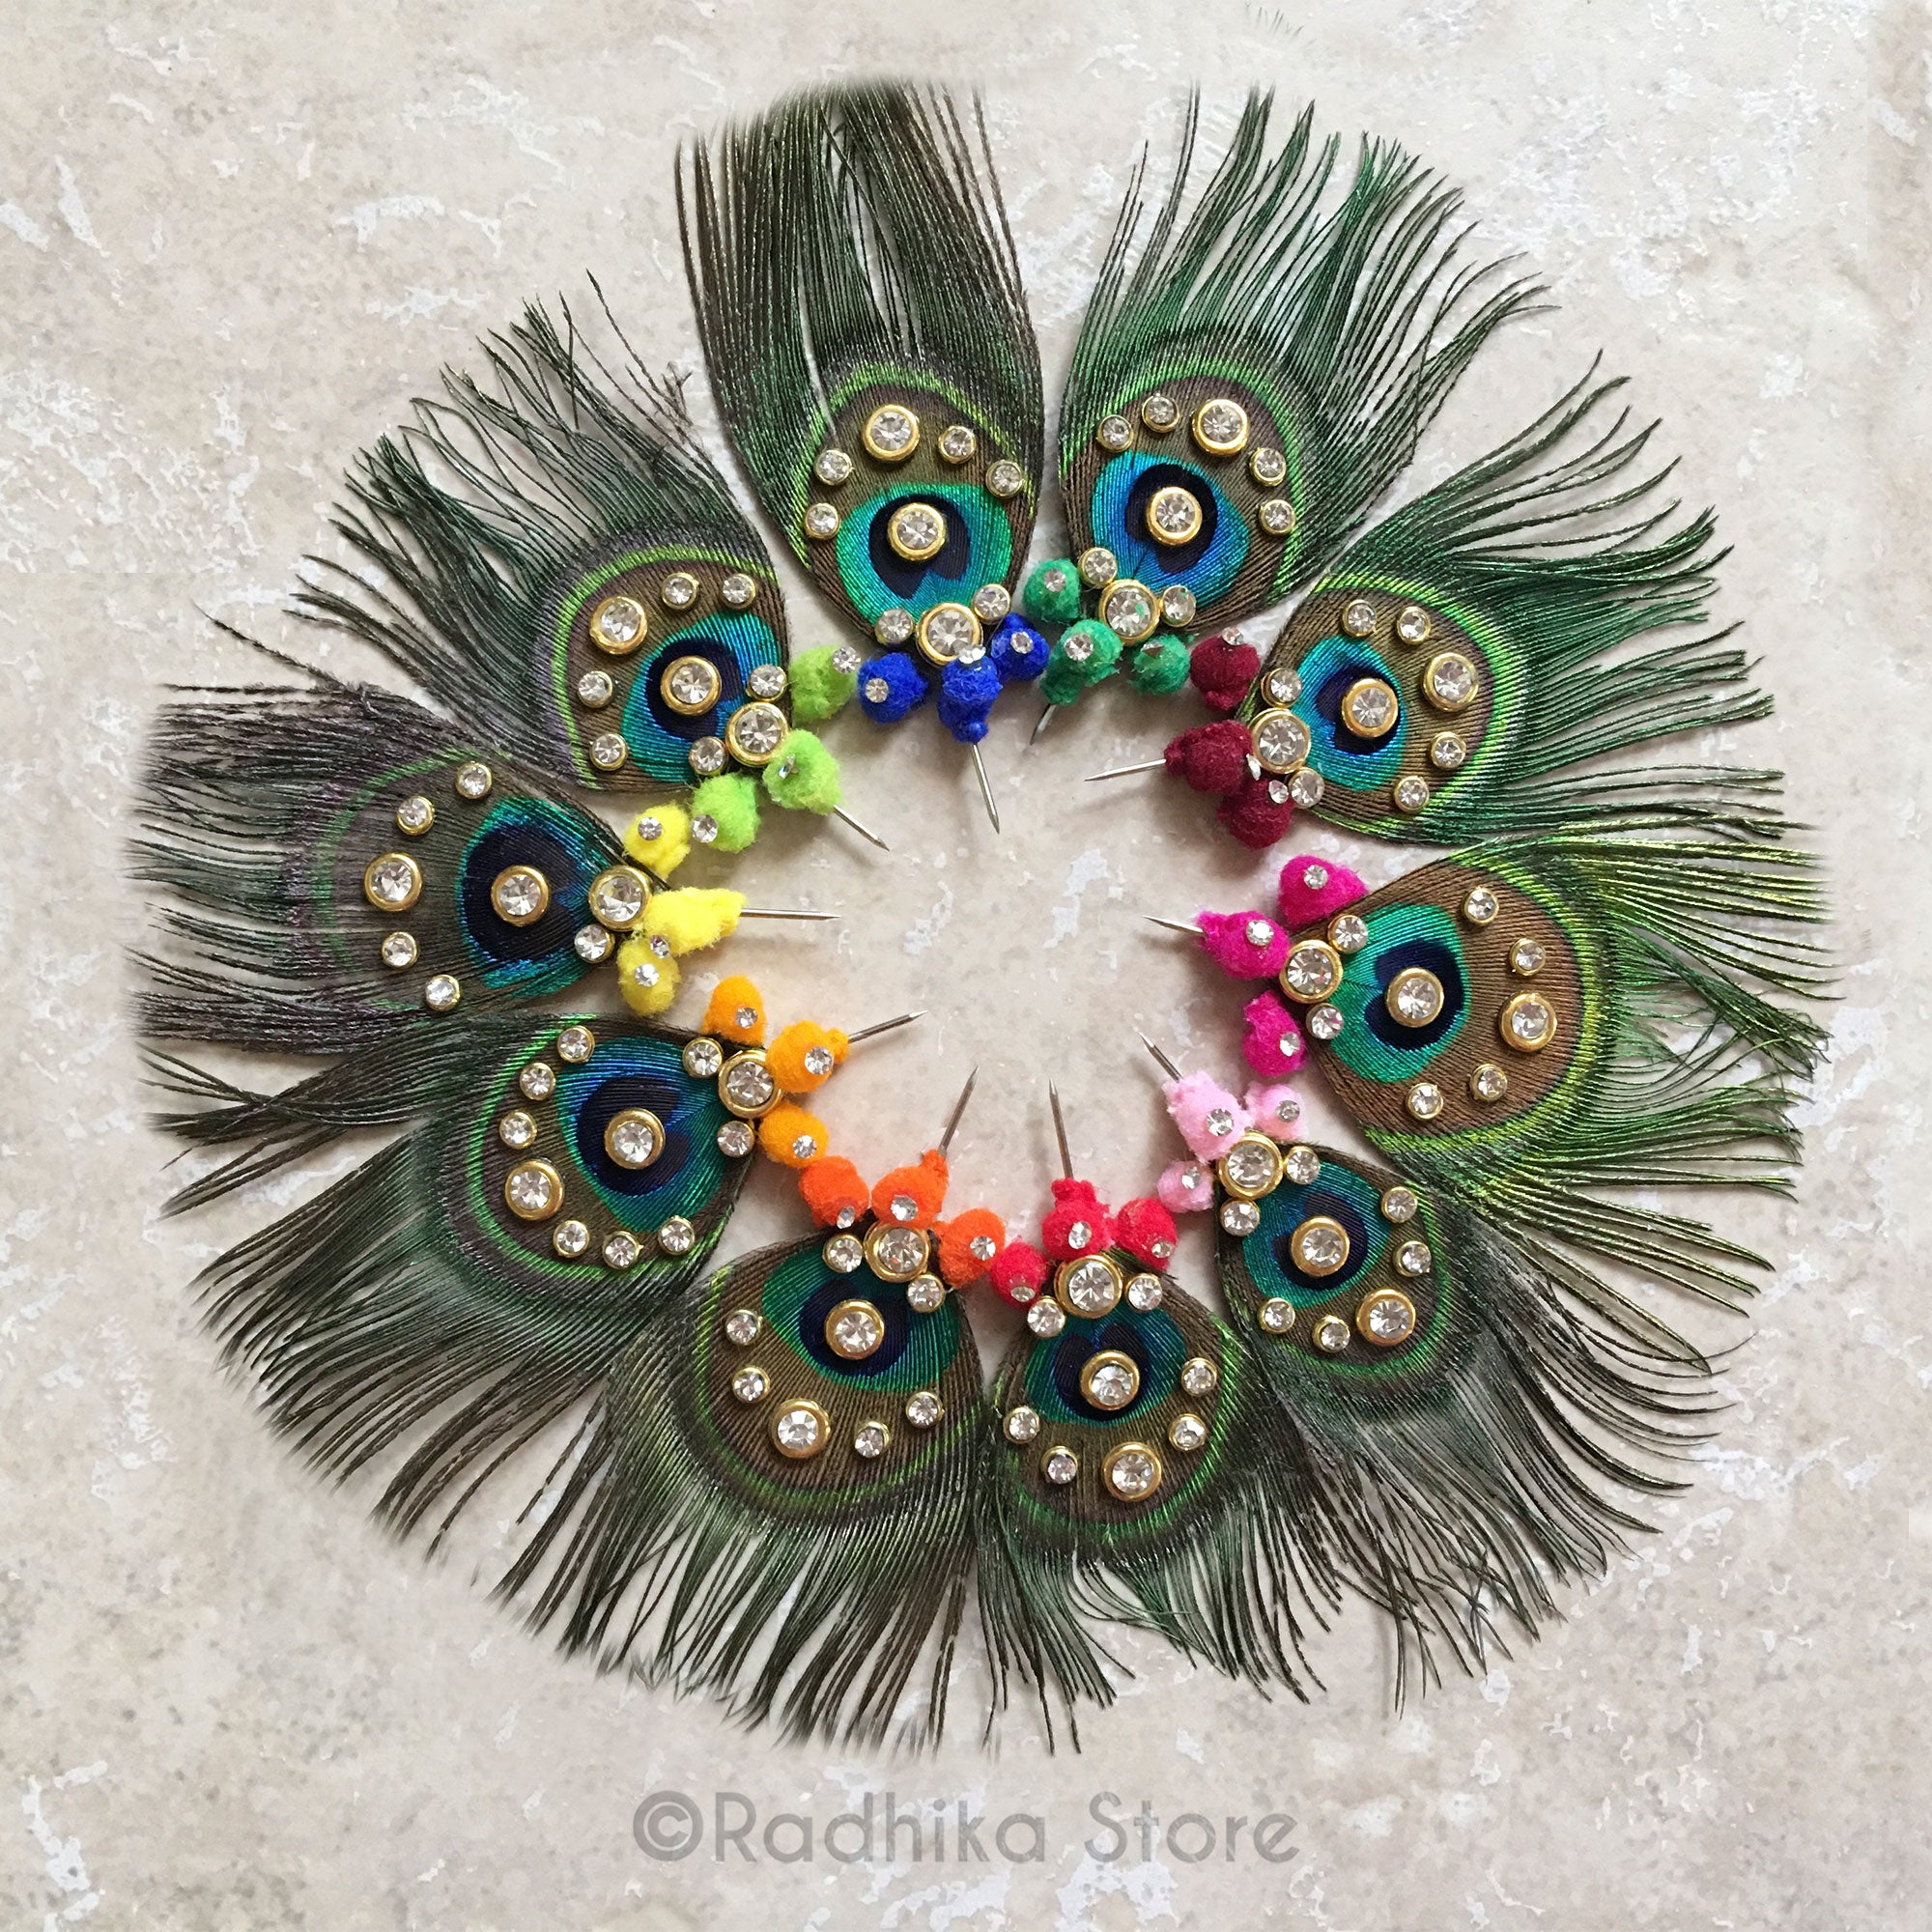 Small Crystal Peacock Feathers - Choose Color